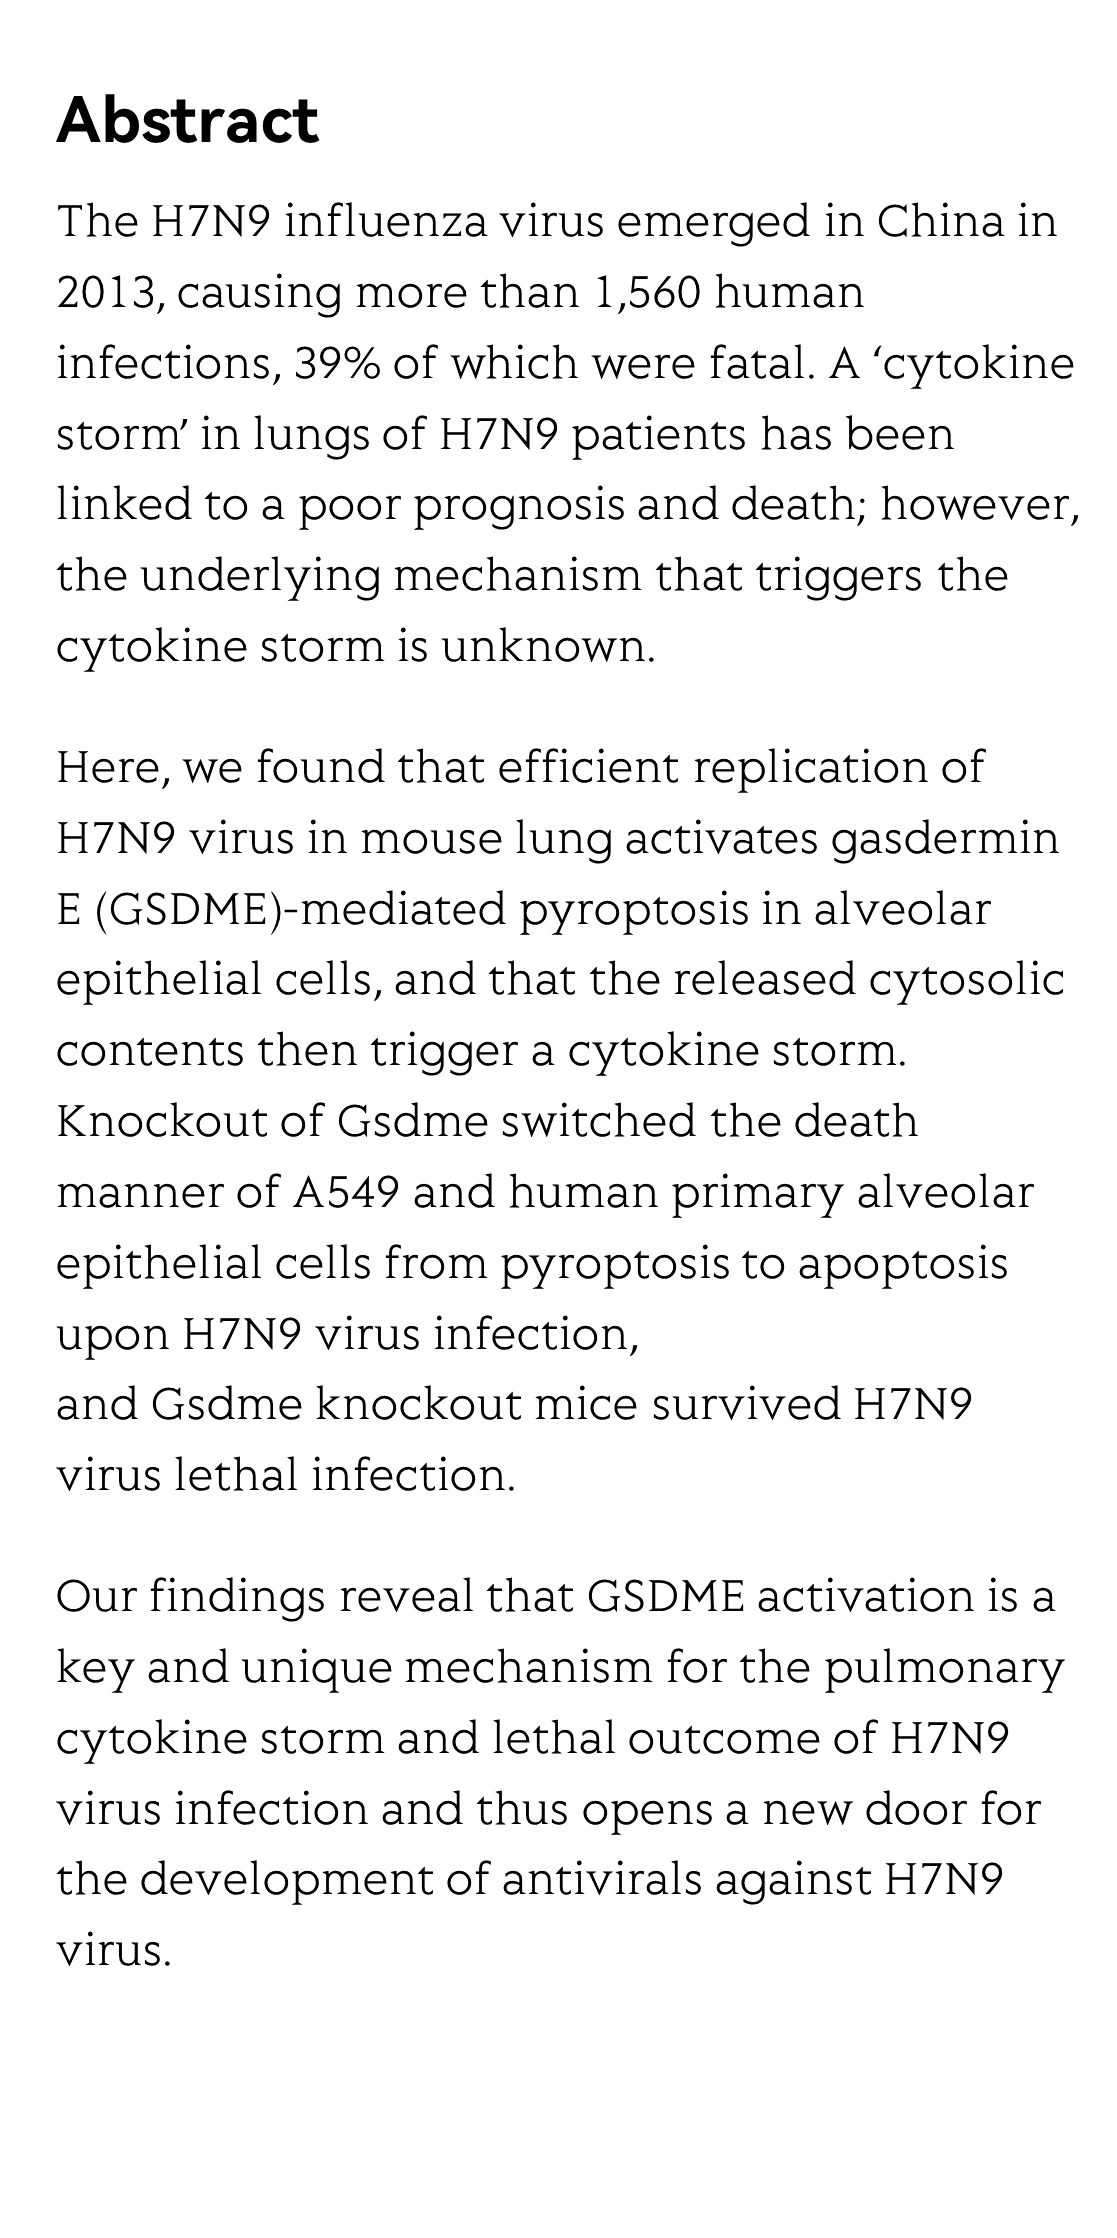 H7N9 virus infection triggers lethal cytokine storm by activating gasdermin E-mediated pyroptosis of lung alveolar epithelial cells_2